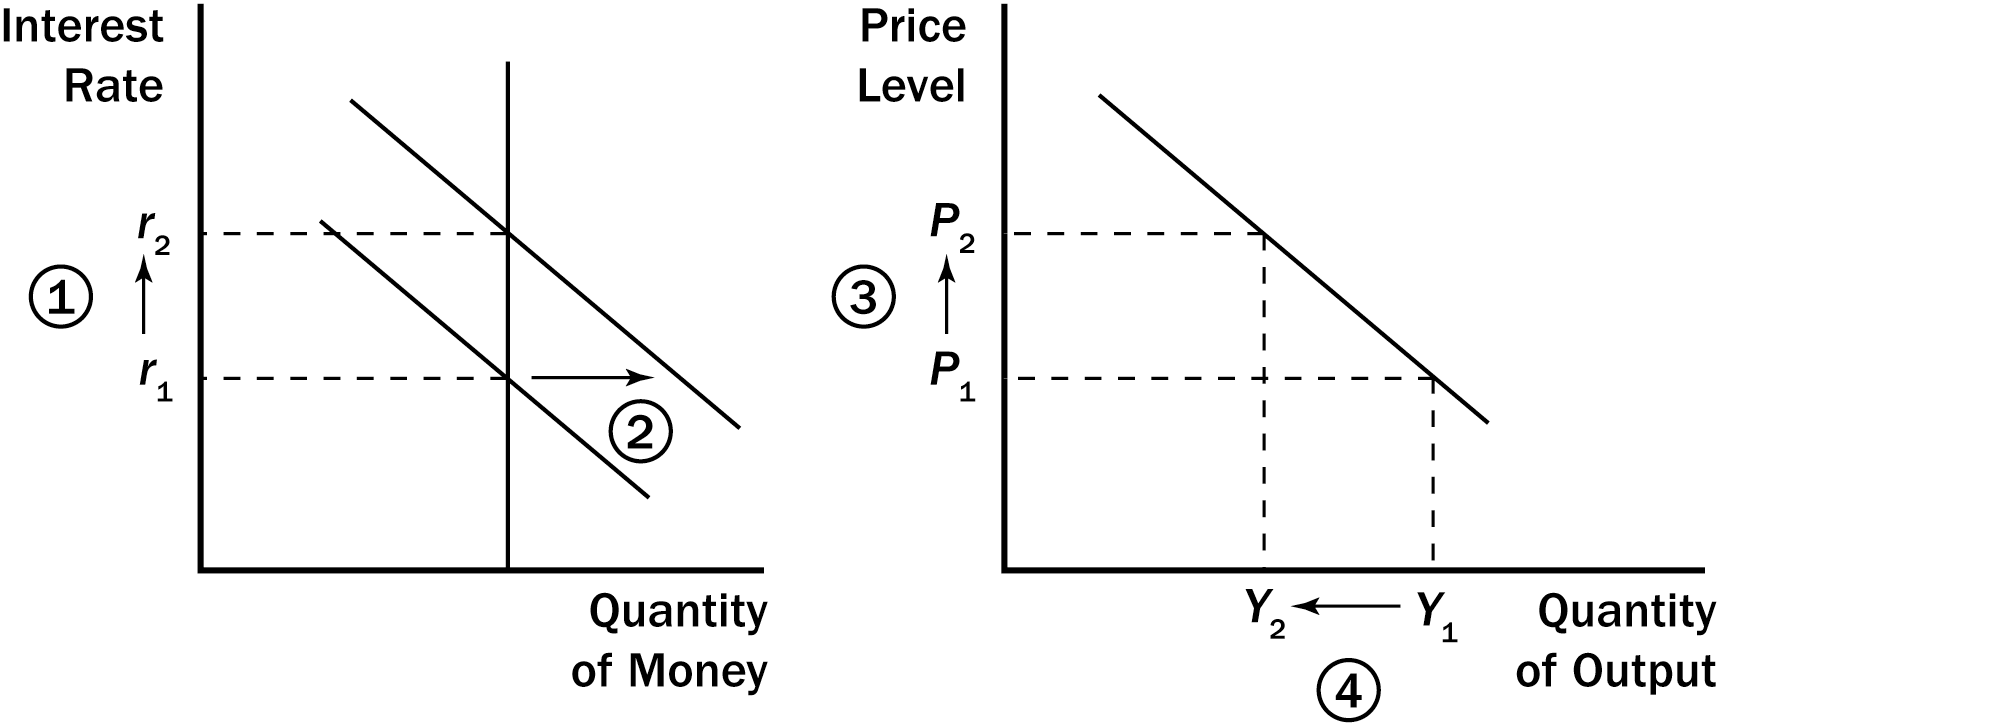 The Role of the European Central Bank in Price Stability - 877 Words ...